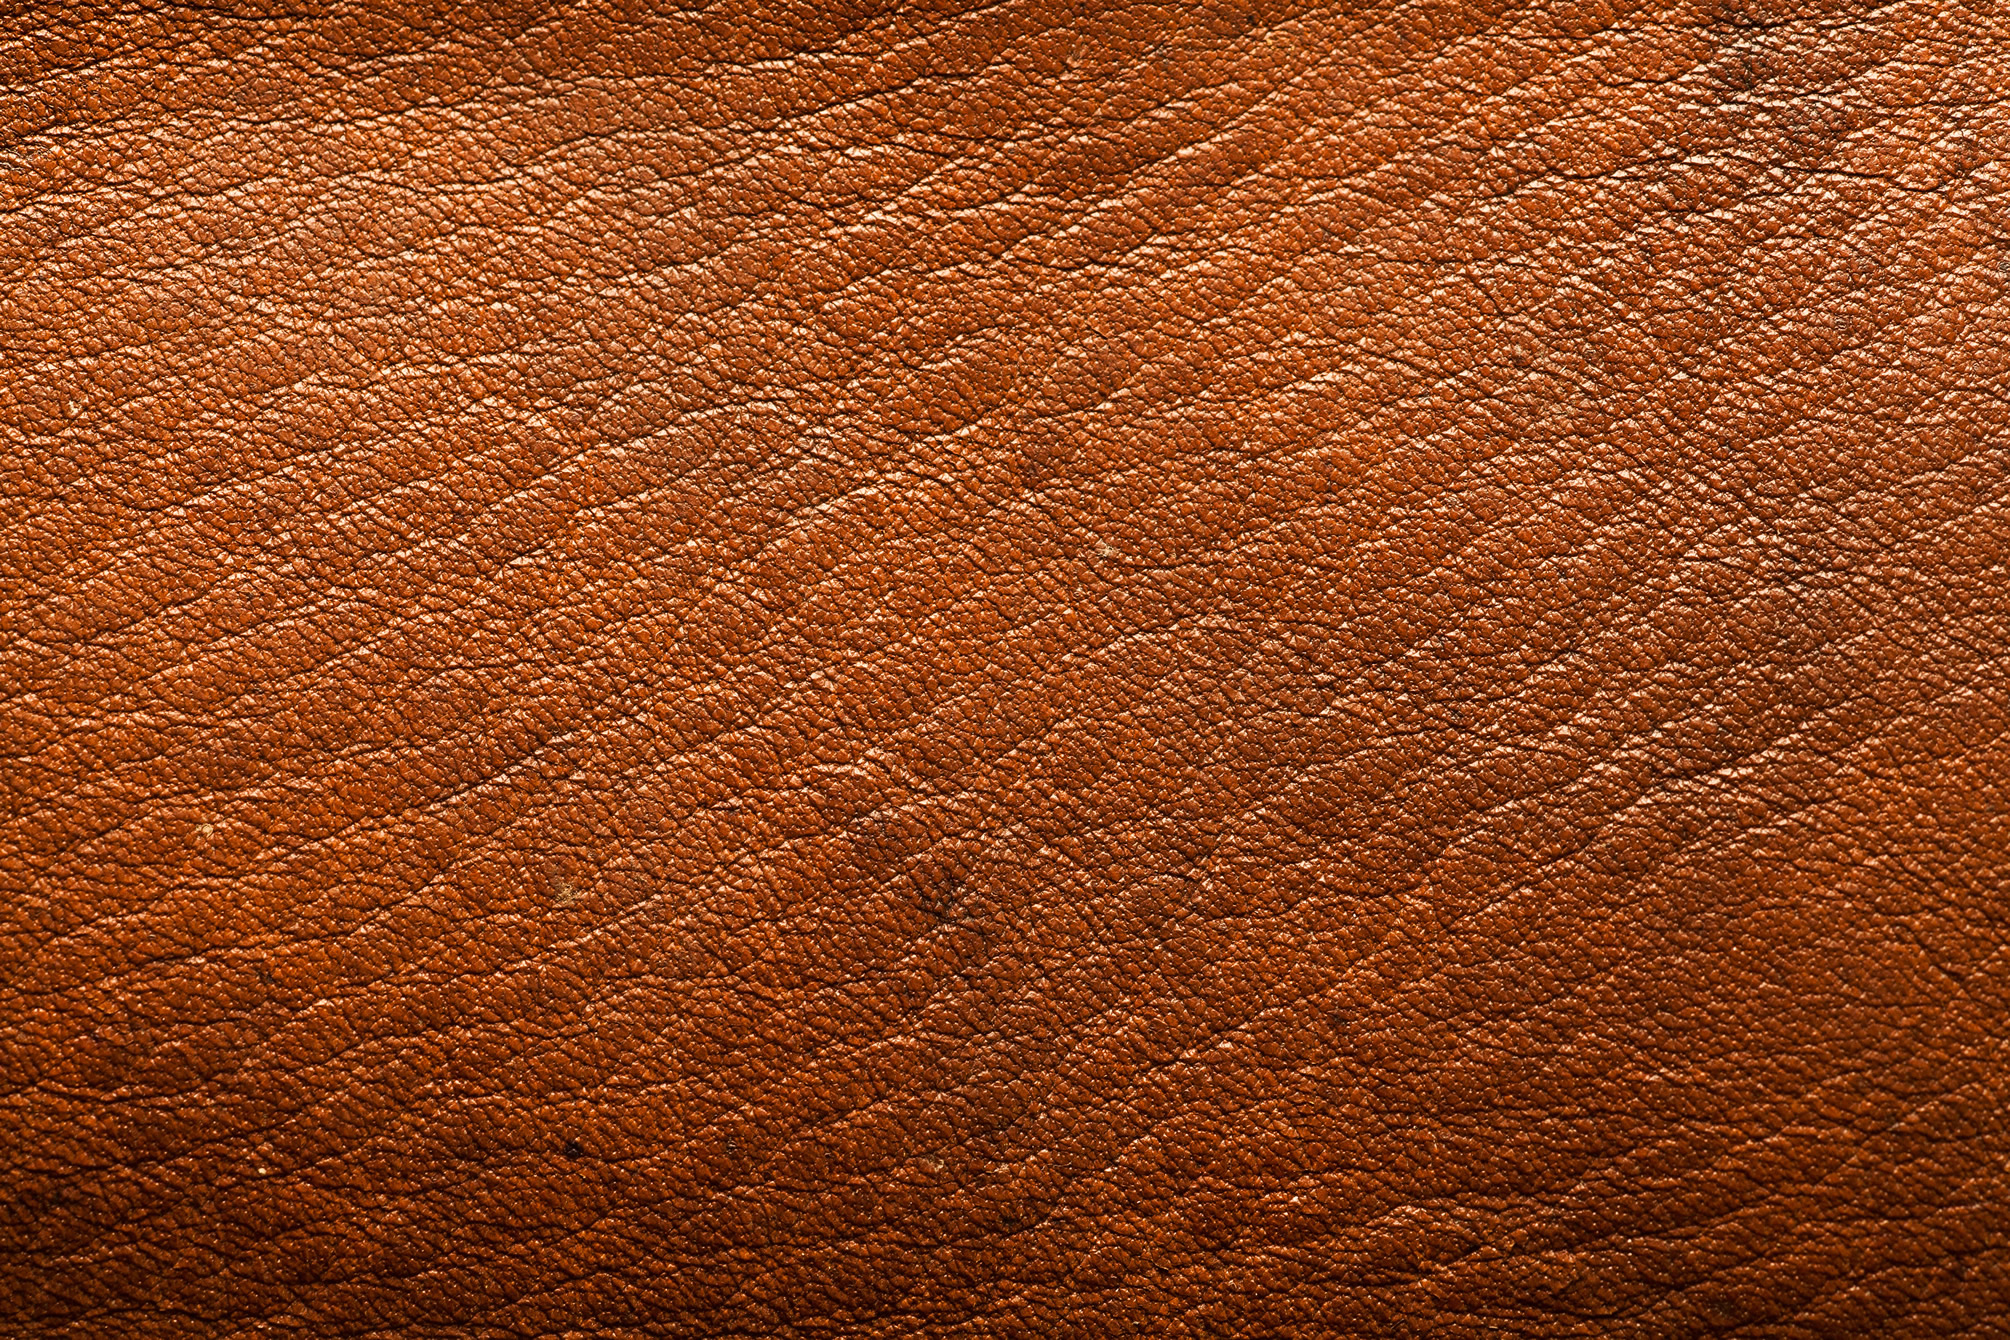 Leather Background High Definition Wallpaper 